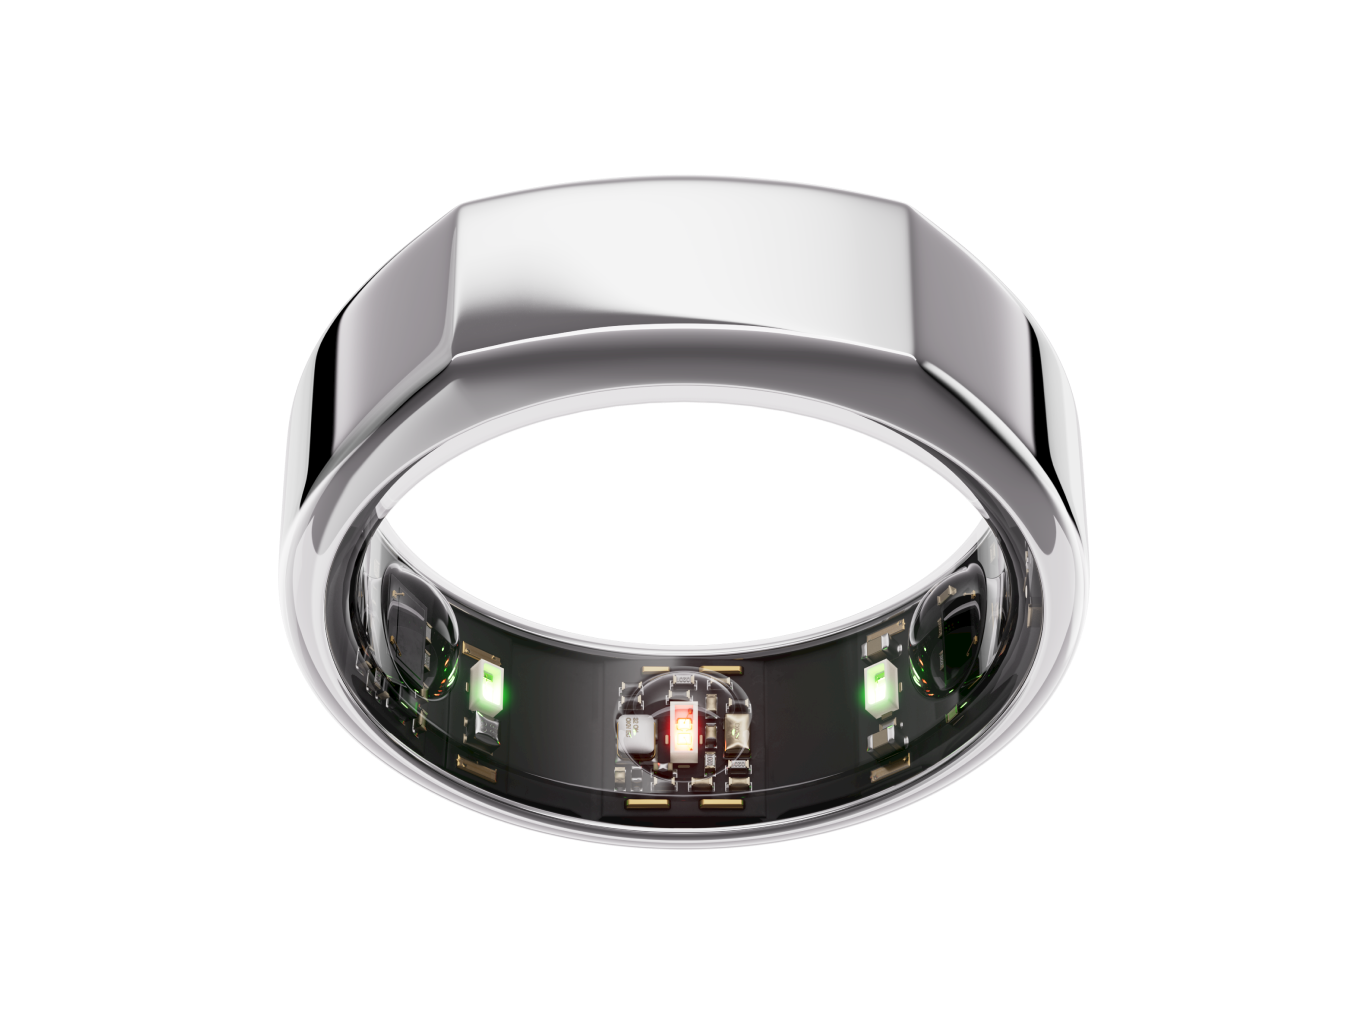 Oura ring review 2022: We tested the generation 3 model to see if